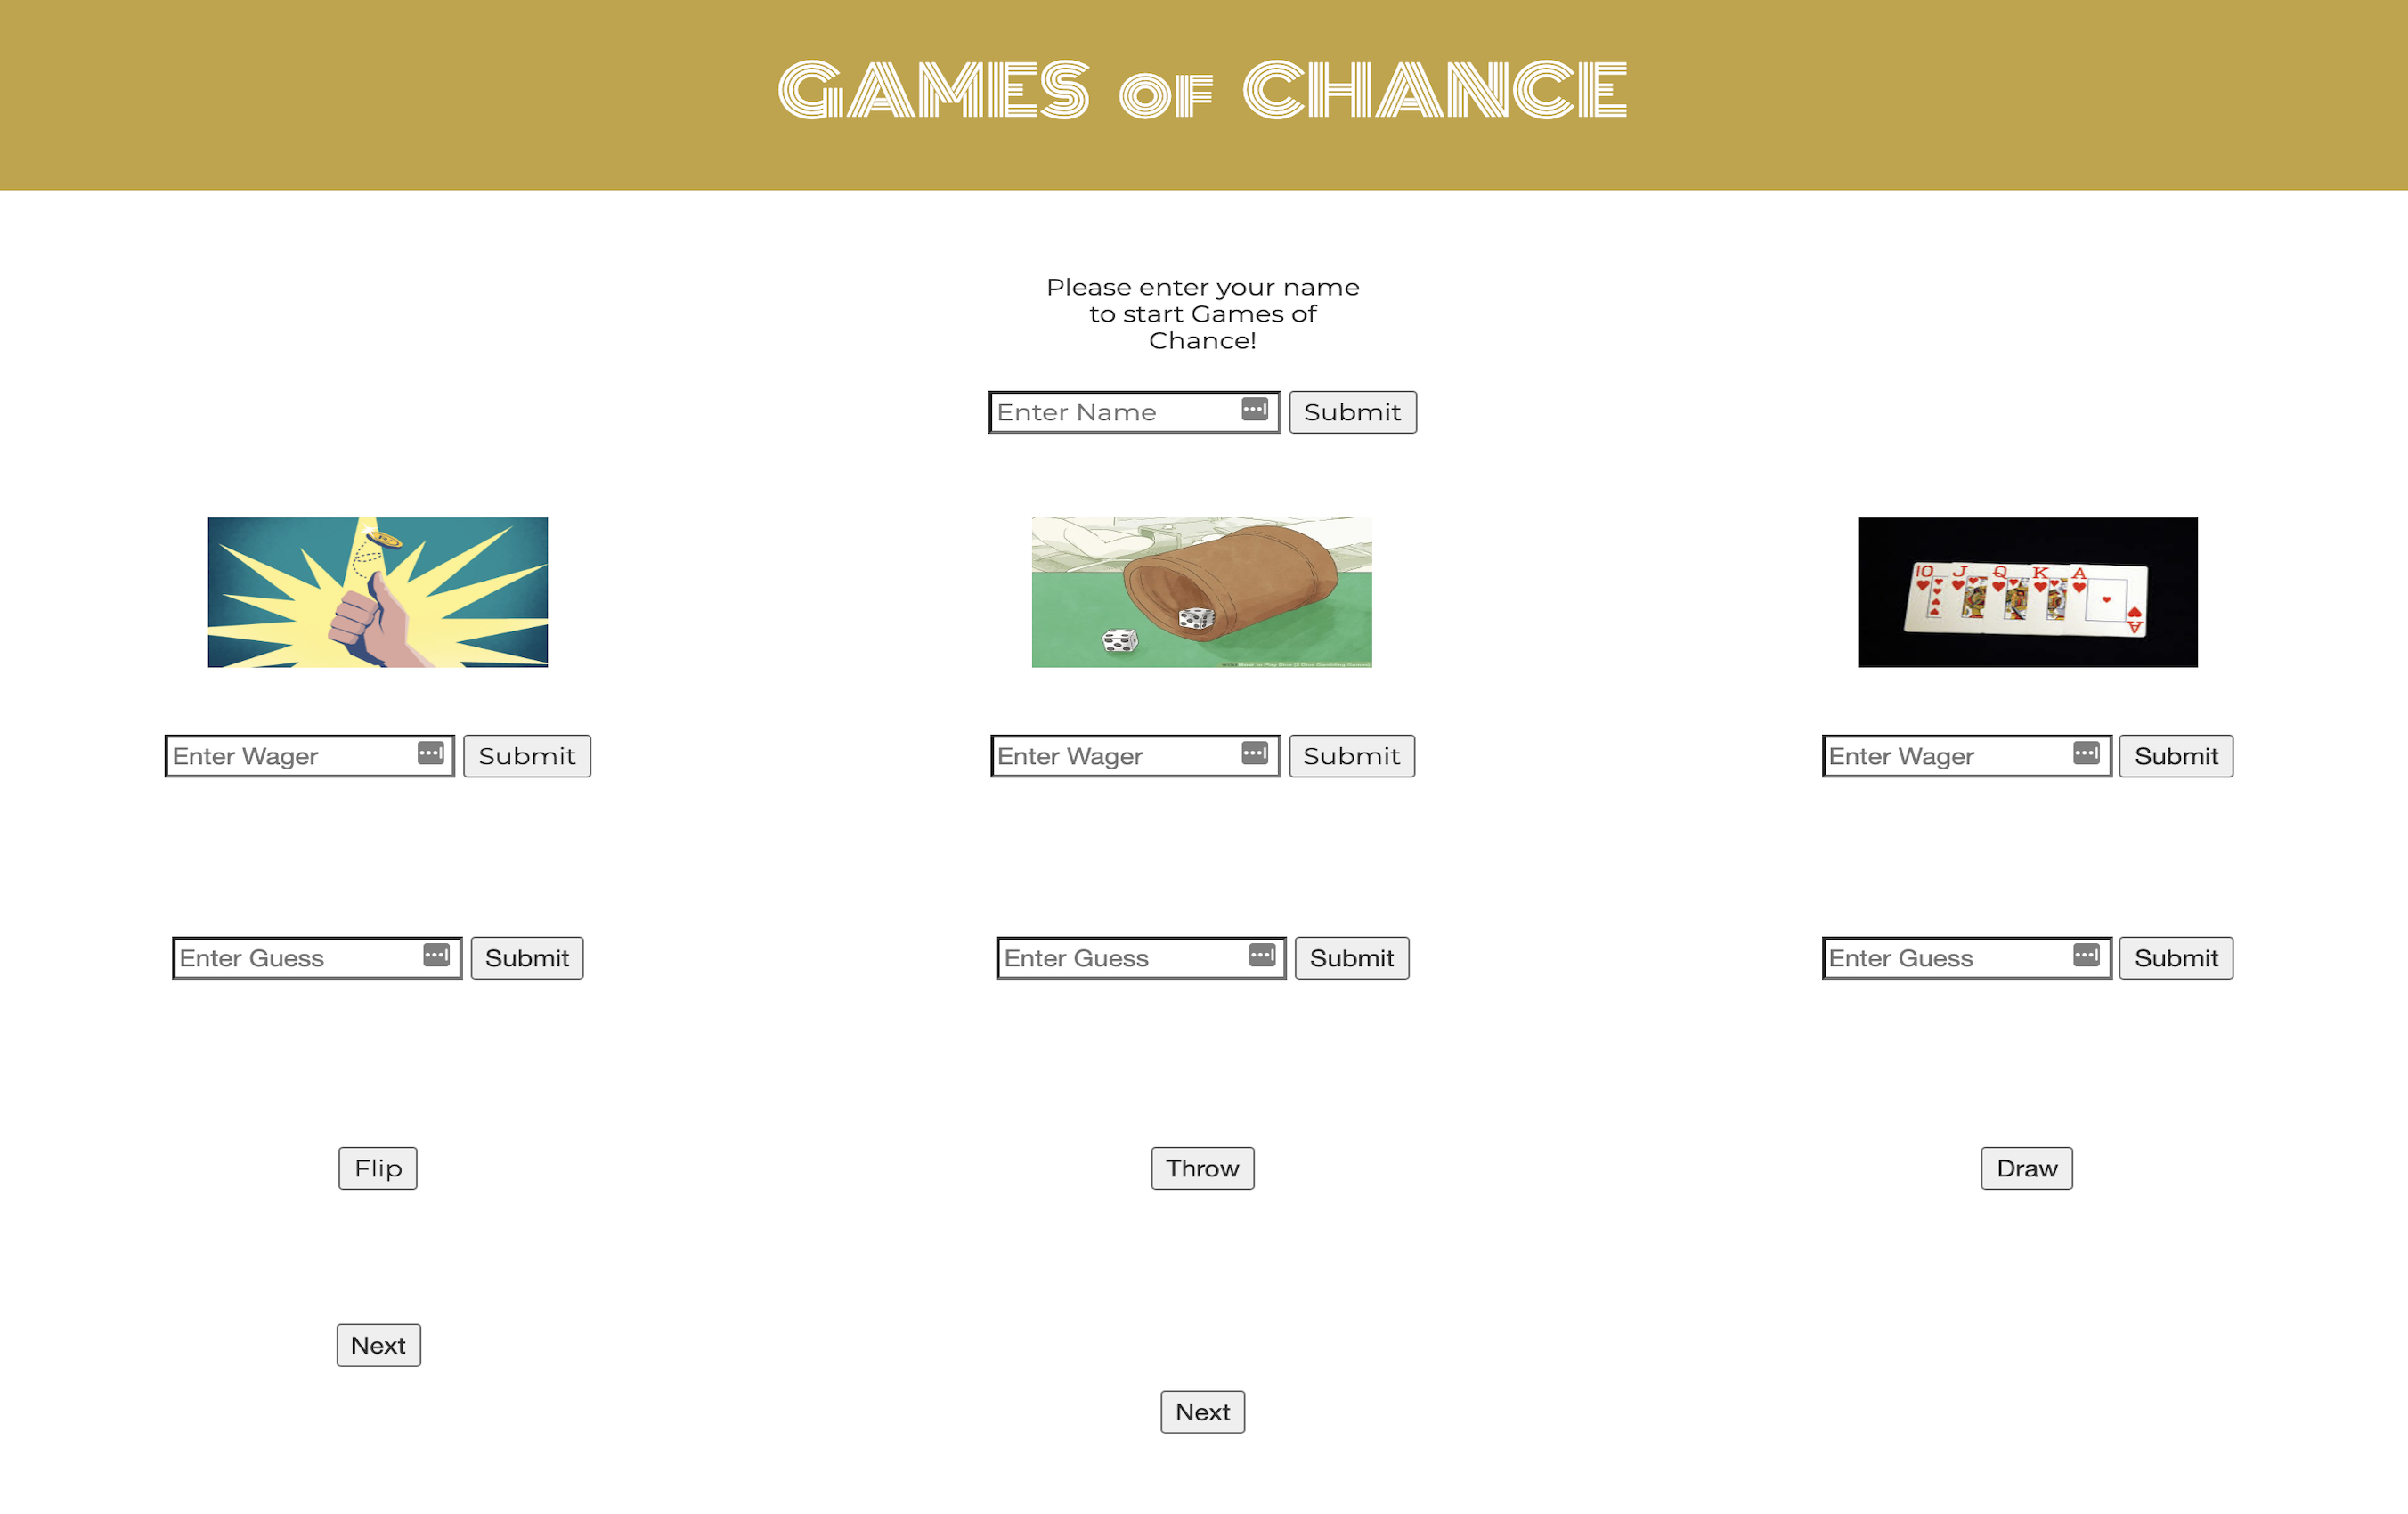 Games of Chance App